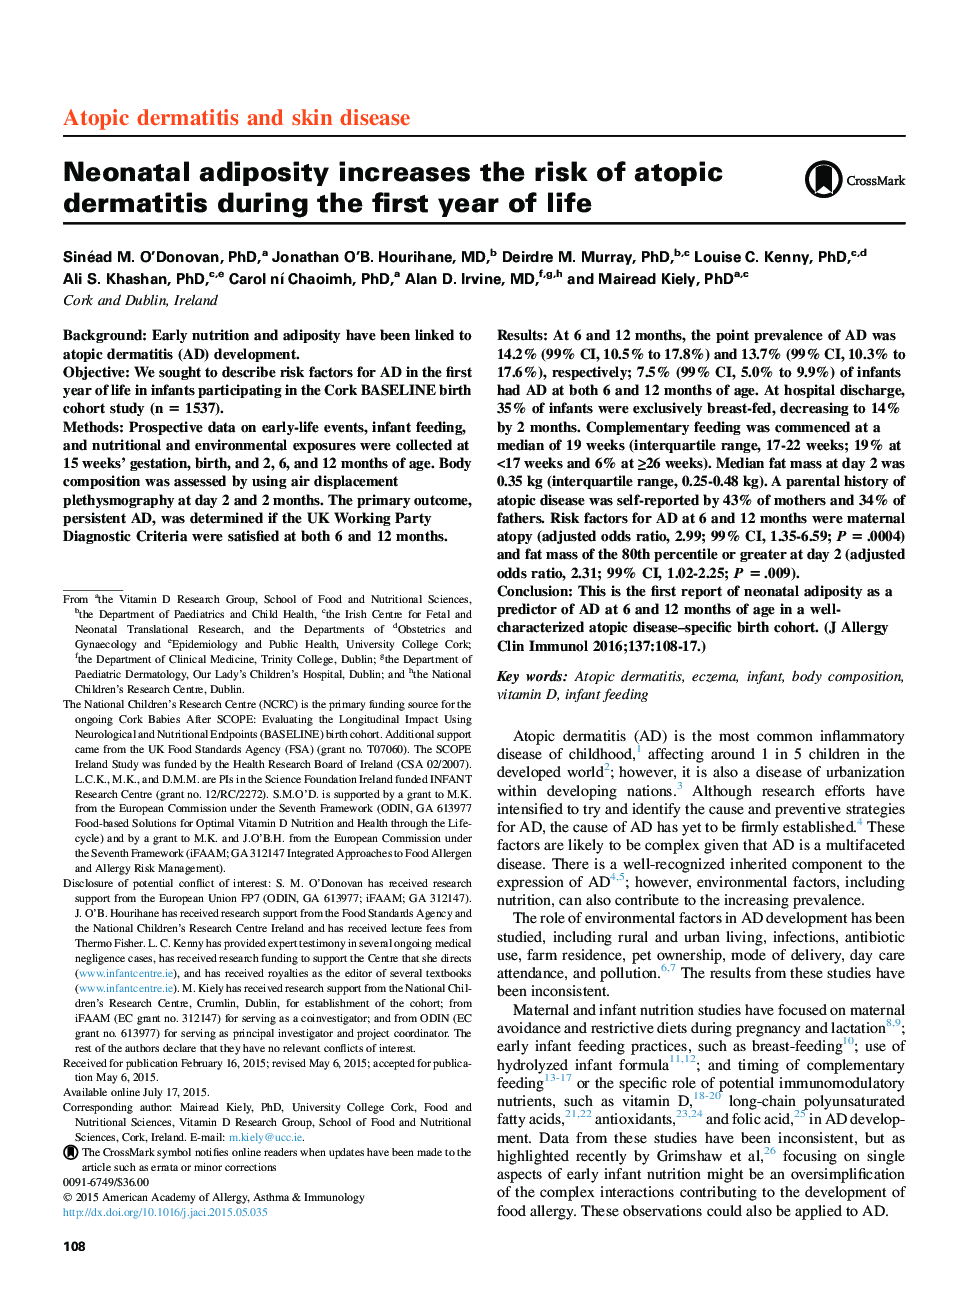 Atopic dermatitis and skin diseaseNeonatal adiposity increases the risk of atopic dermatitis during the first year of life